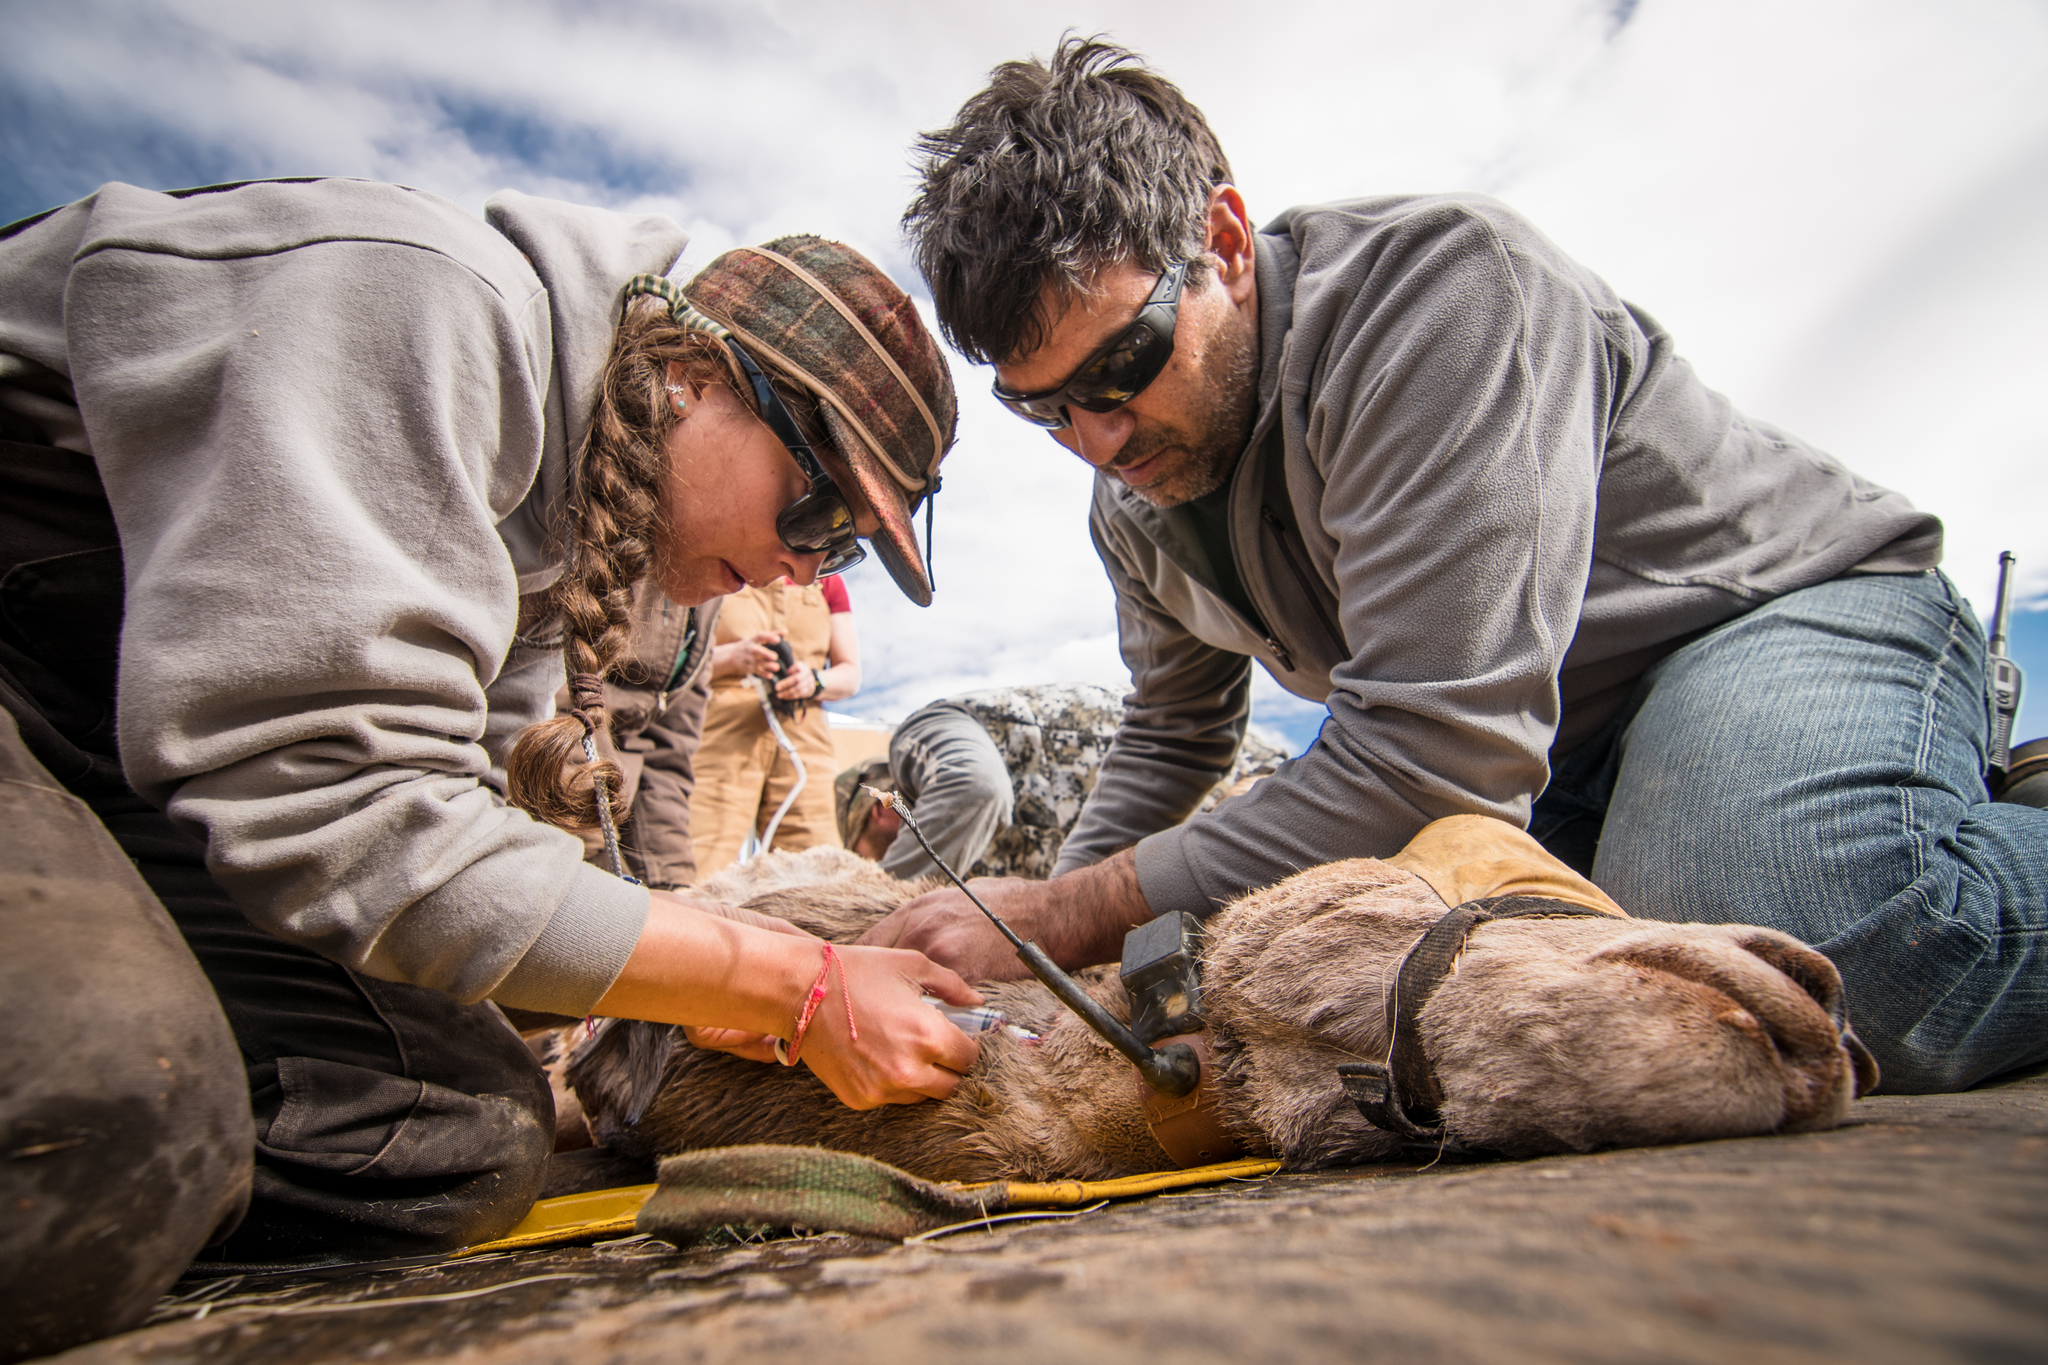 Matt Kauffman, on the right, working with a PhD student Anna Ortega. They are processing a bighorn sheep during captures focused on taking biometrics and installing/replacing GPS tracking collars.